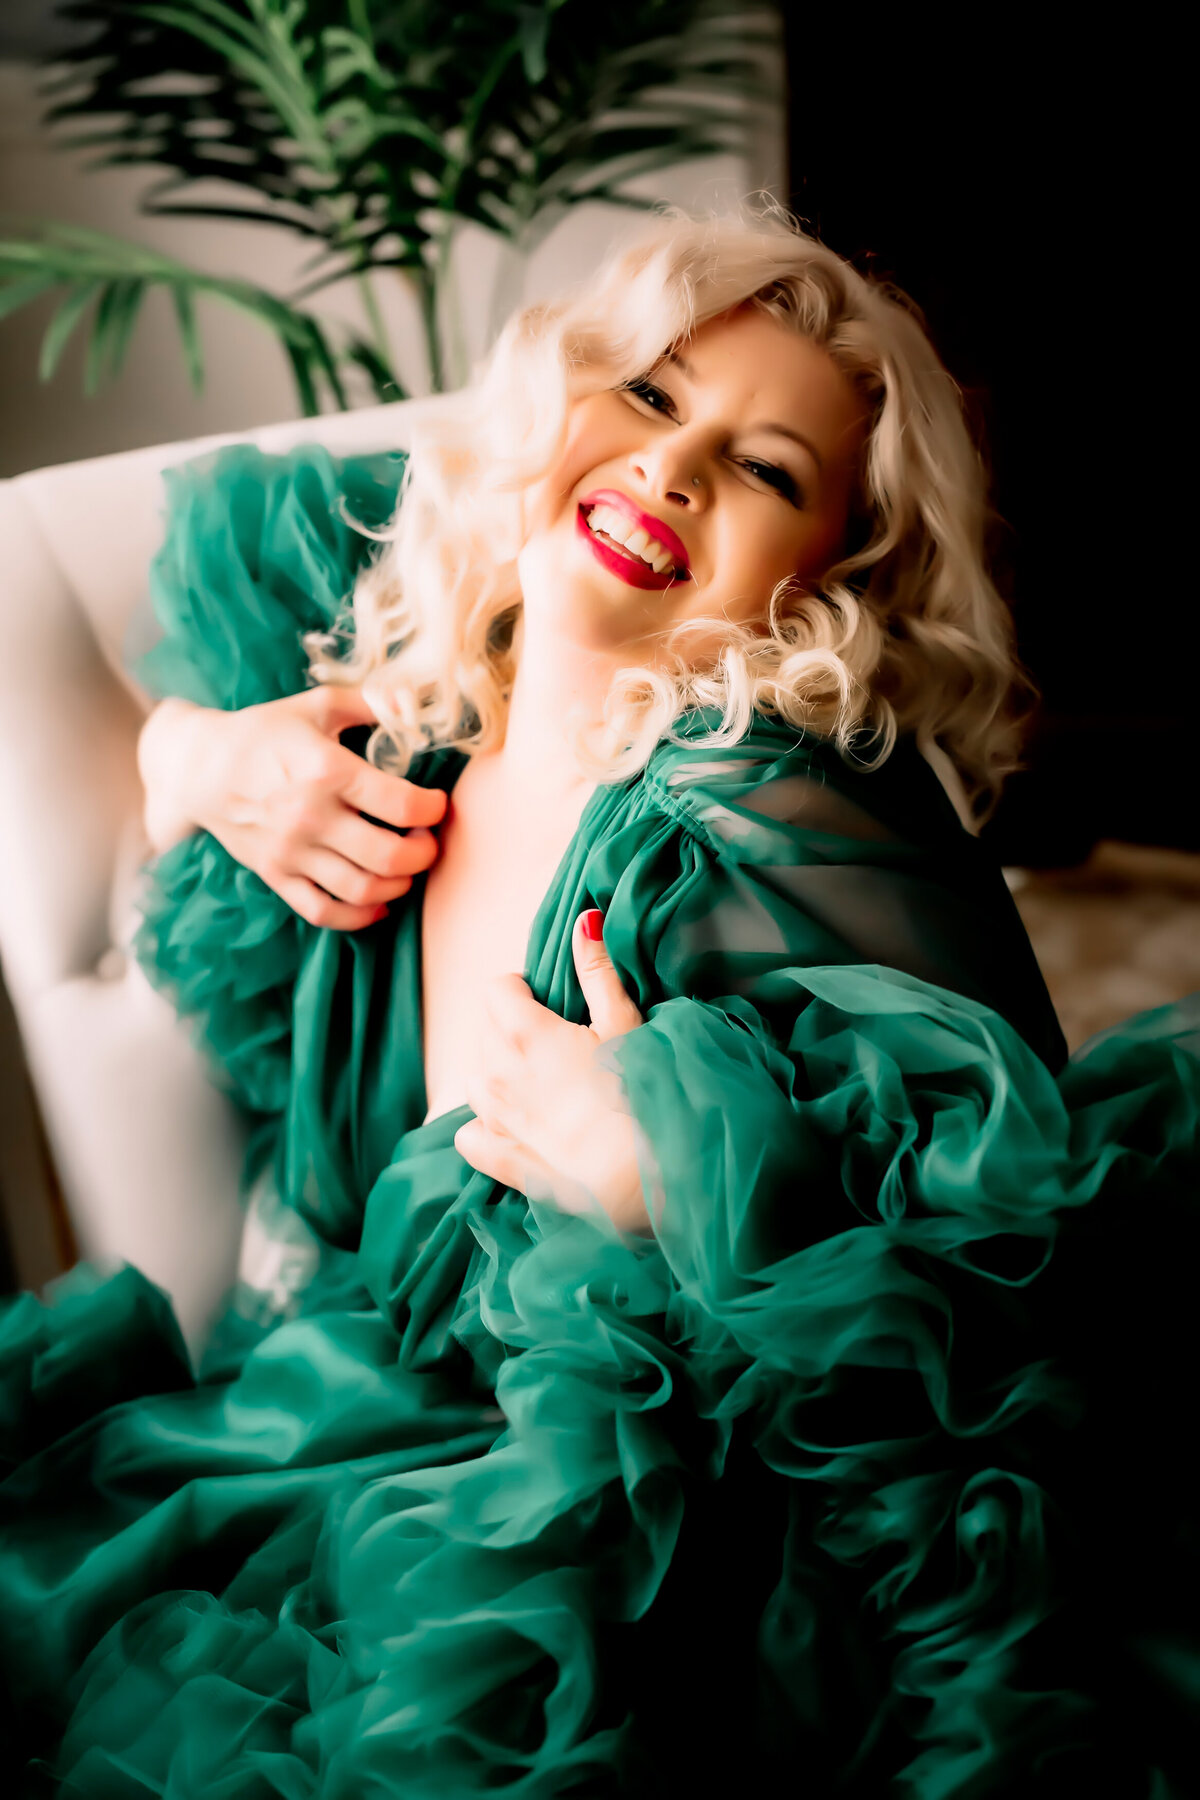 playful image of a woman posing in a green tulle robe laughing at the camera for her boudoir photoshoot